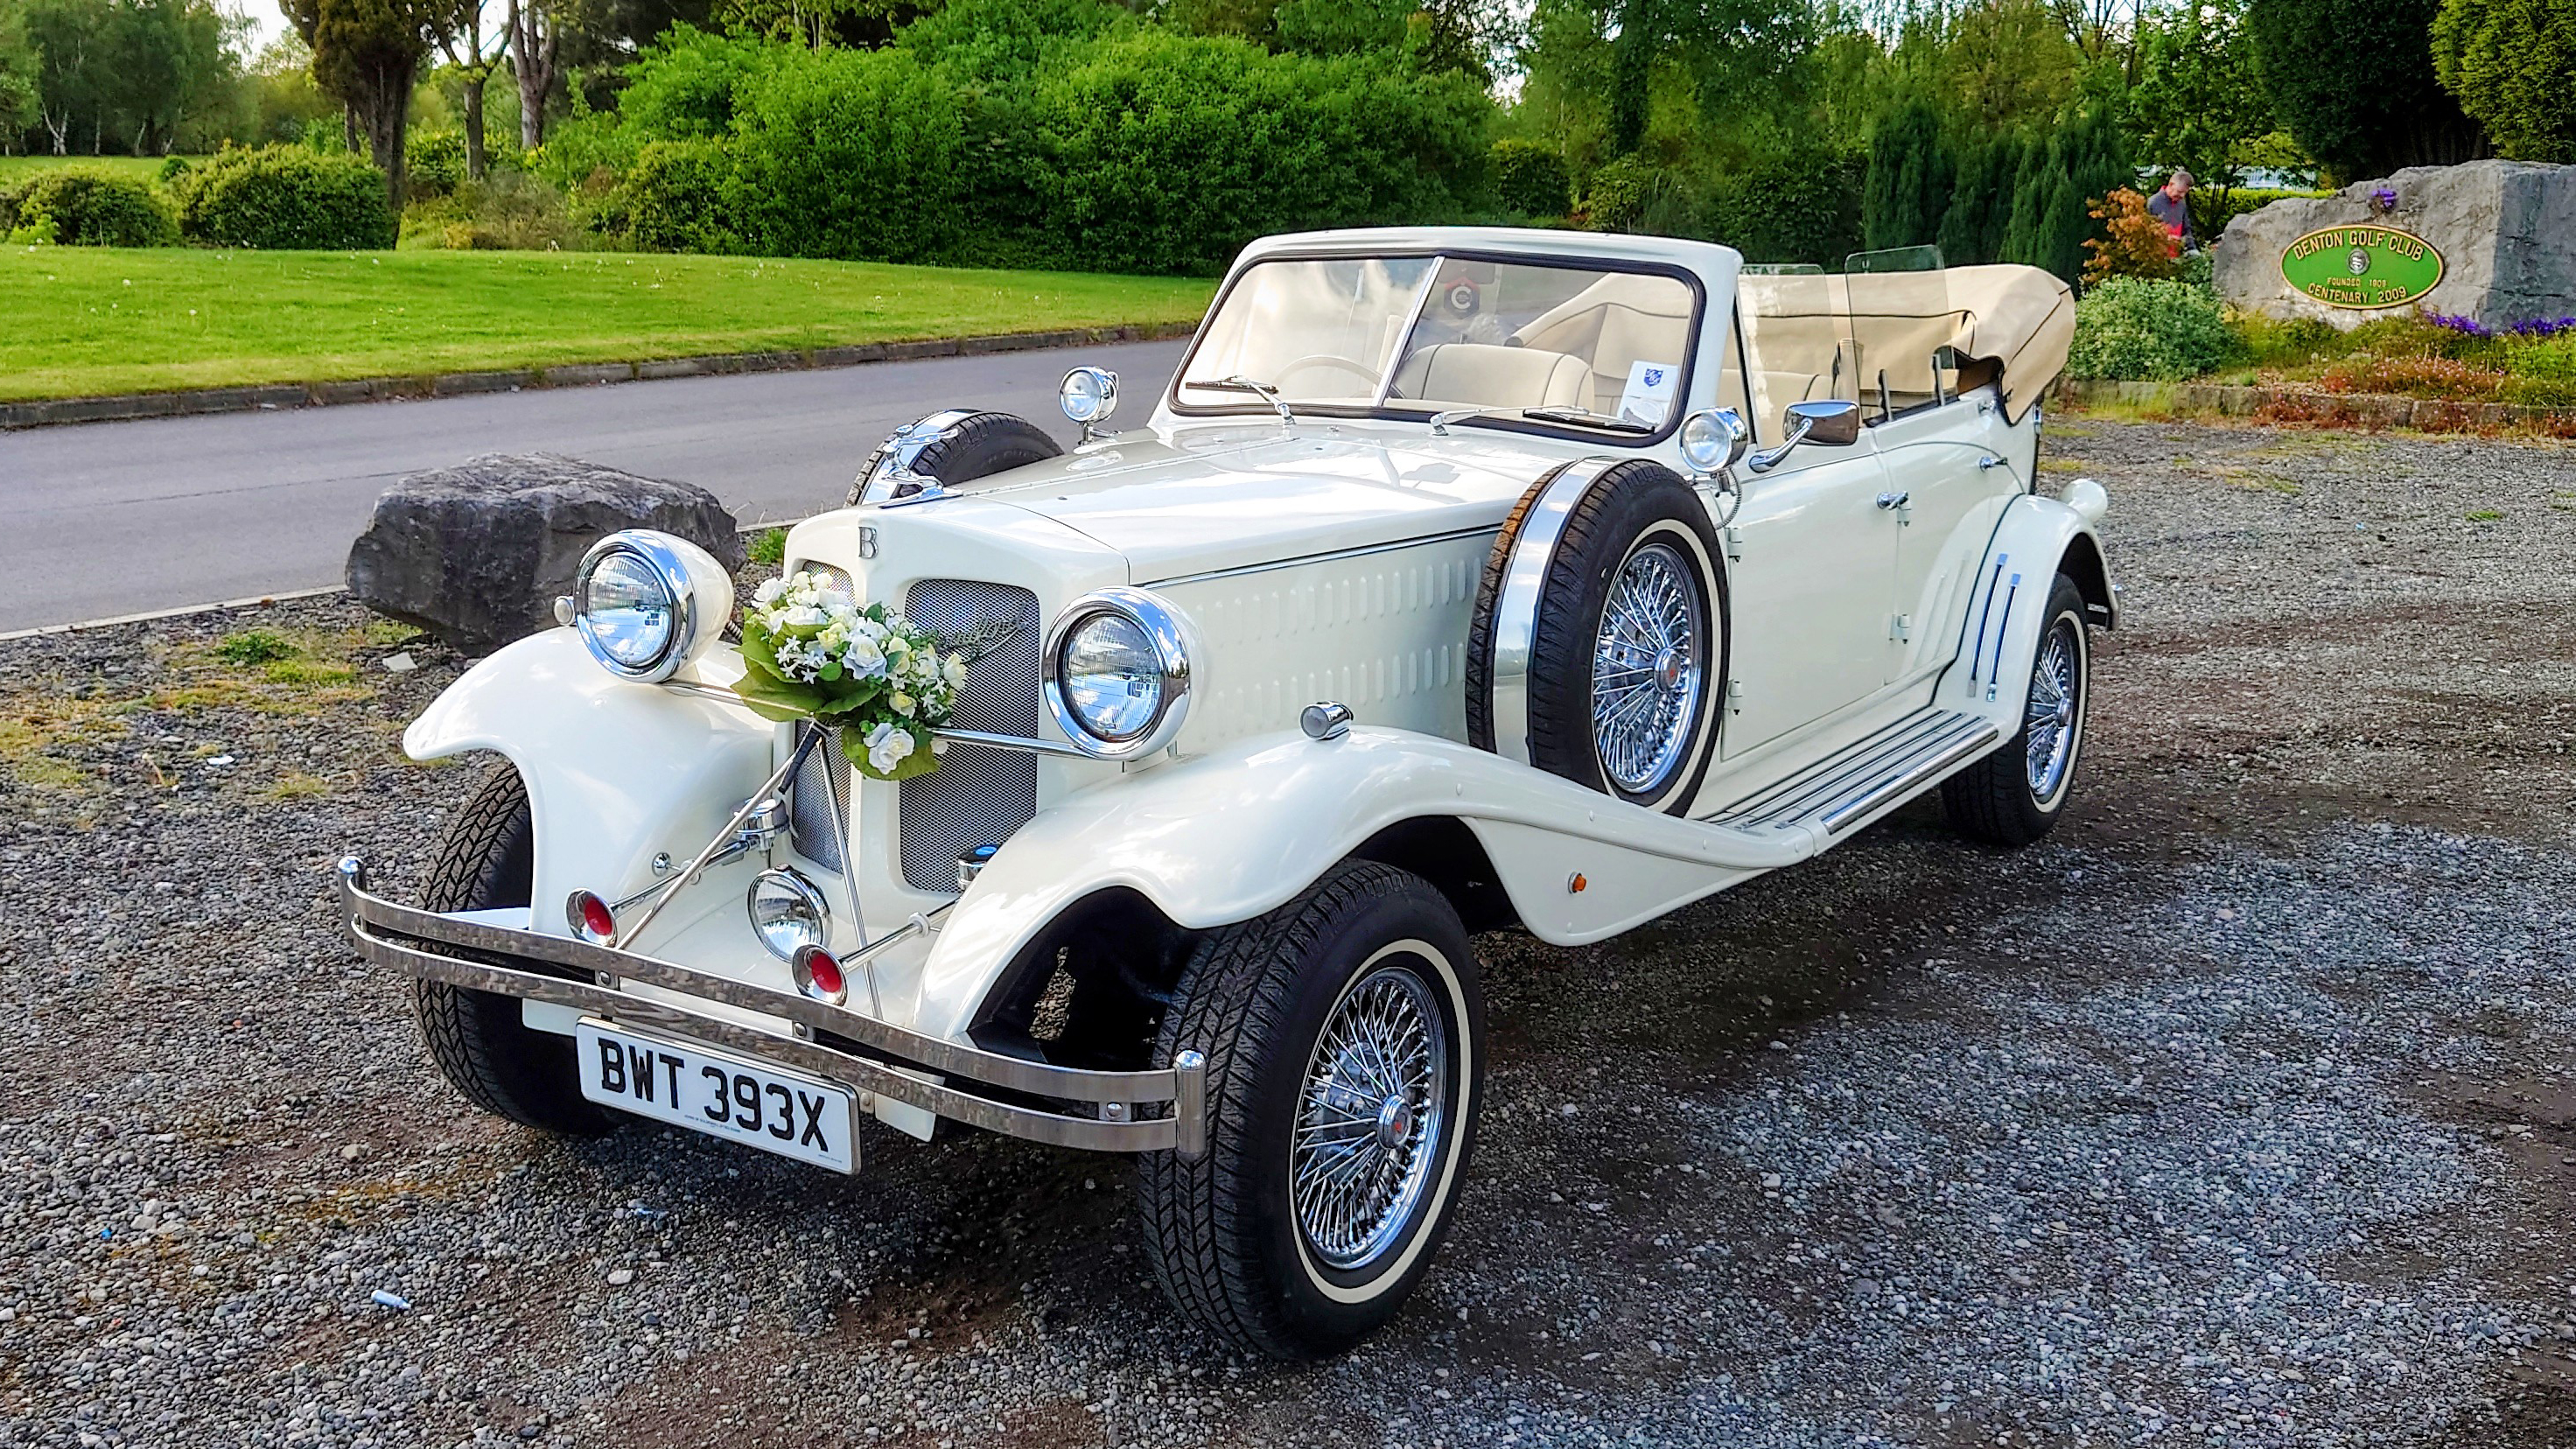 Ivory classic convertible Beauford with roof down dressed with wedding flower arrangment on its front grill. Vehicle is parked in the middle of a path in a Warrington Park.